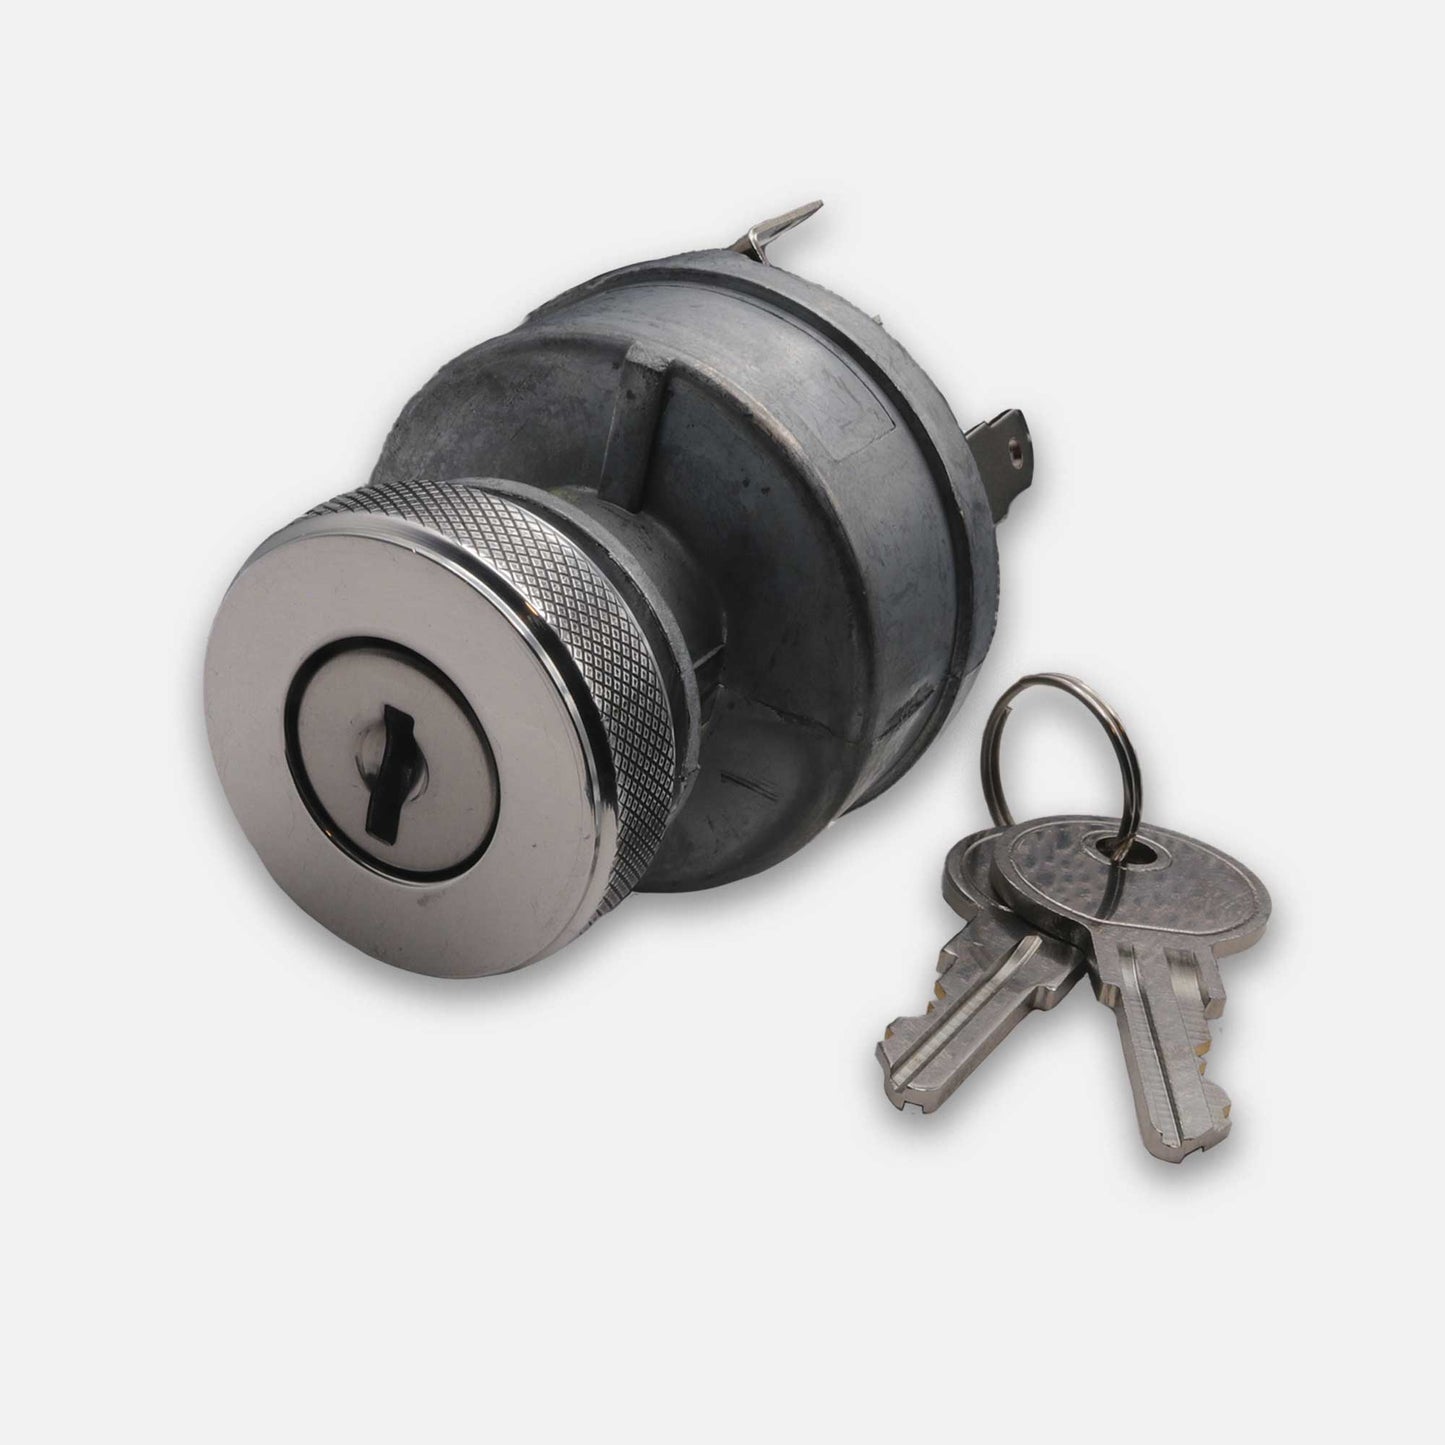 STANDARD KEYED IGNITION SWITCH - ACC/OFF/ON/START